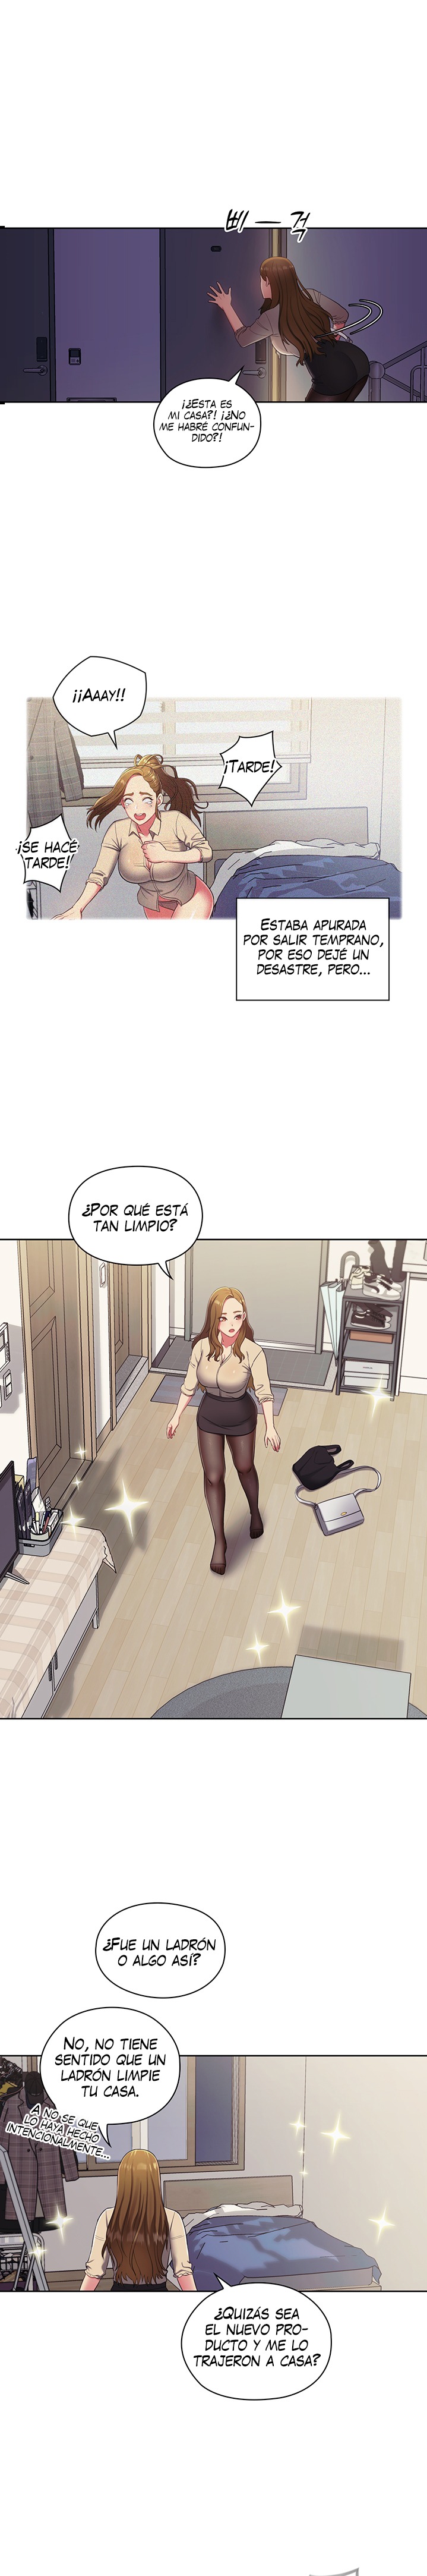 A Housekeeper Raw - Chapter 1 Page 26